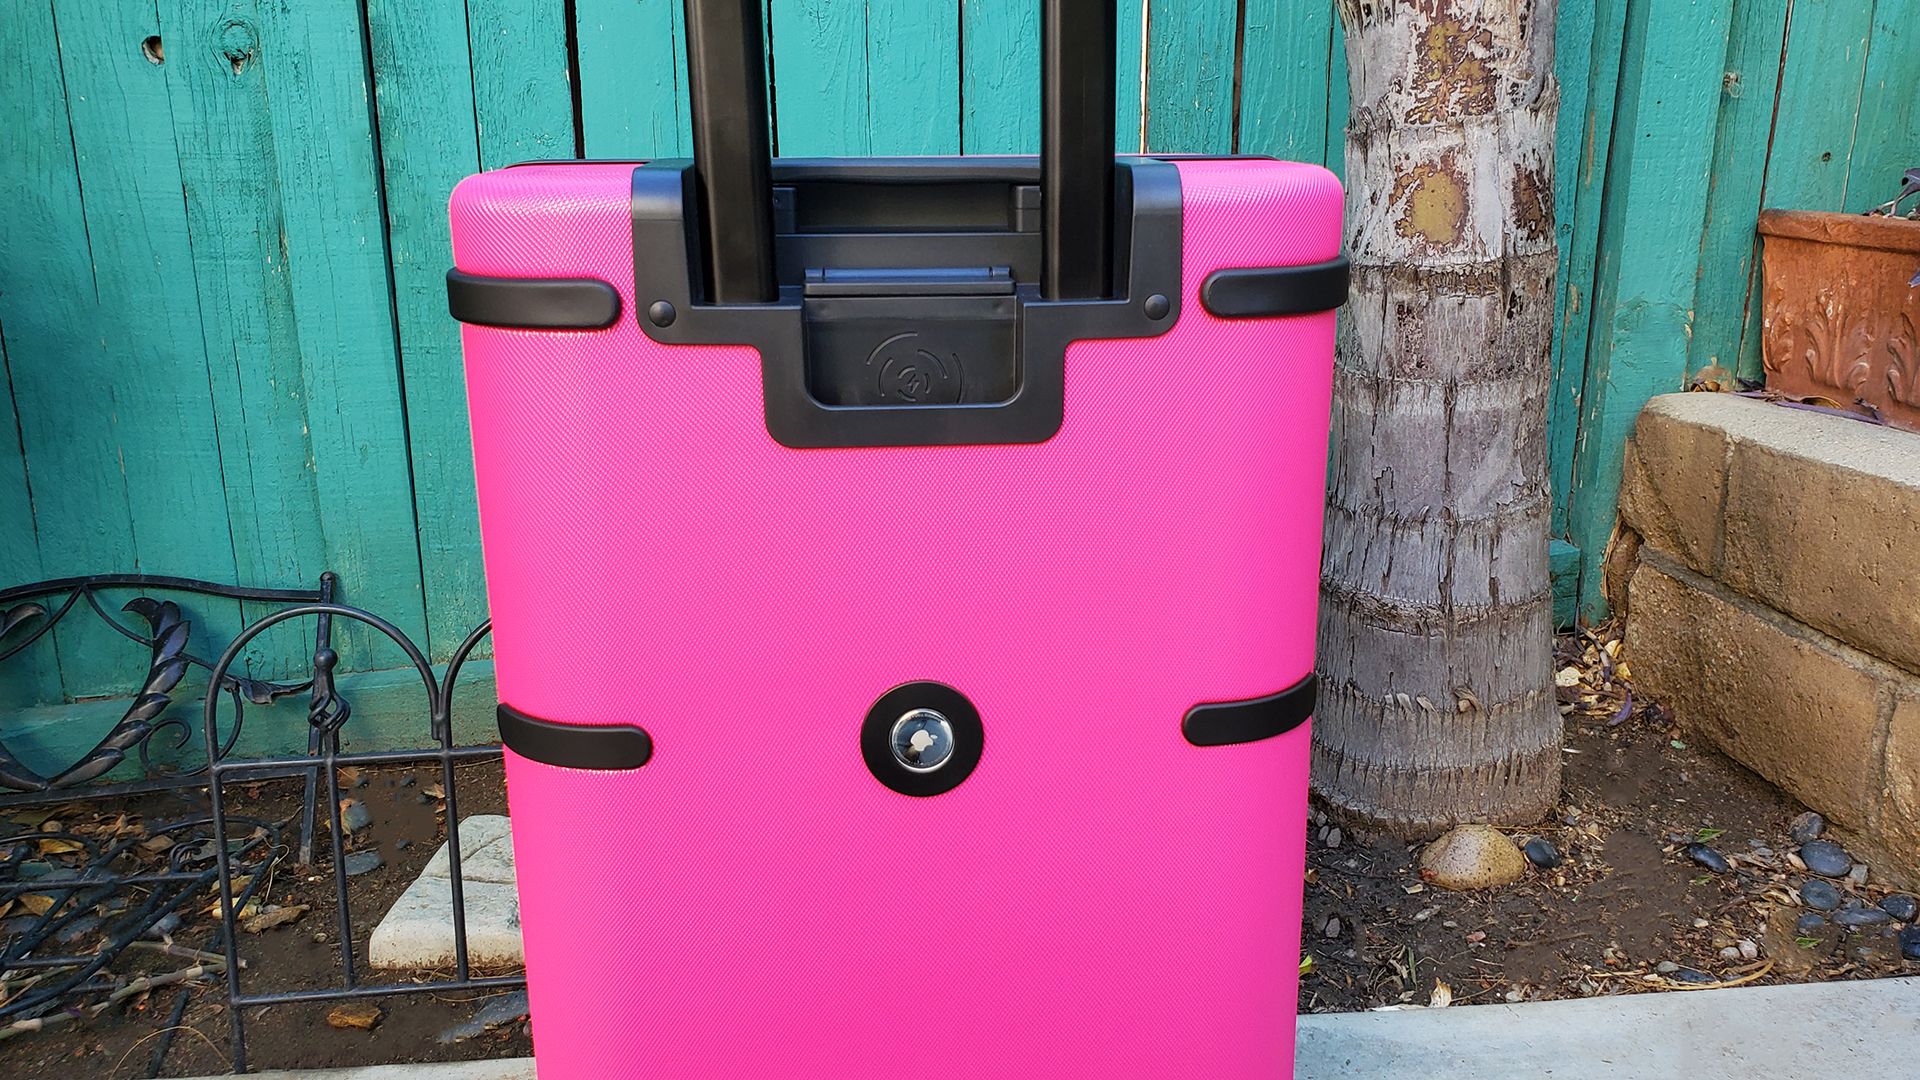 The T-Mobile Samsara Un-carrier On smart suitcase standing outdoors.